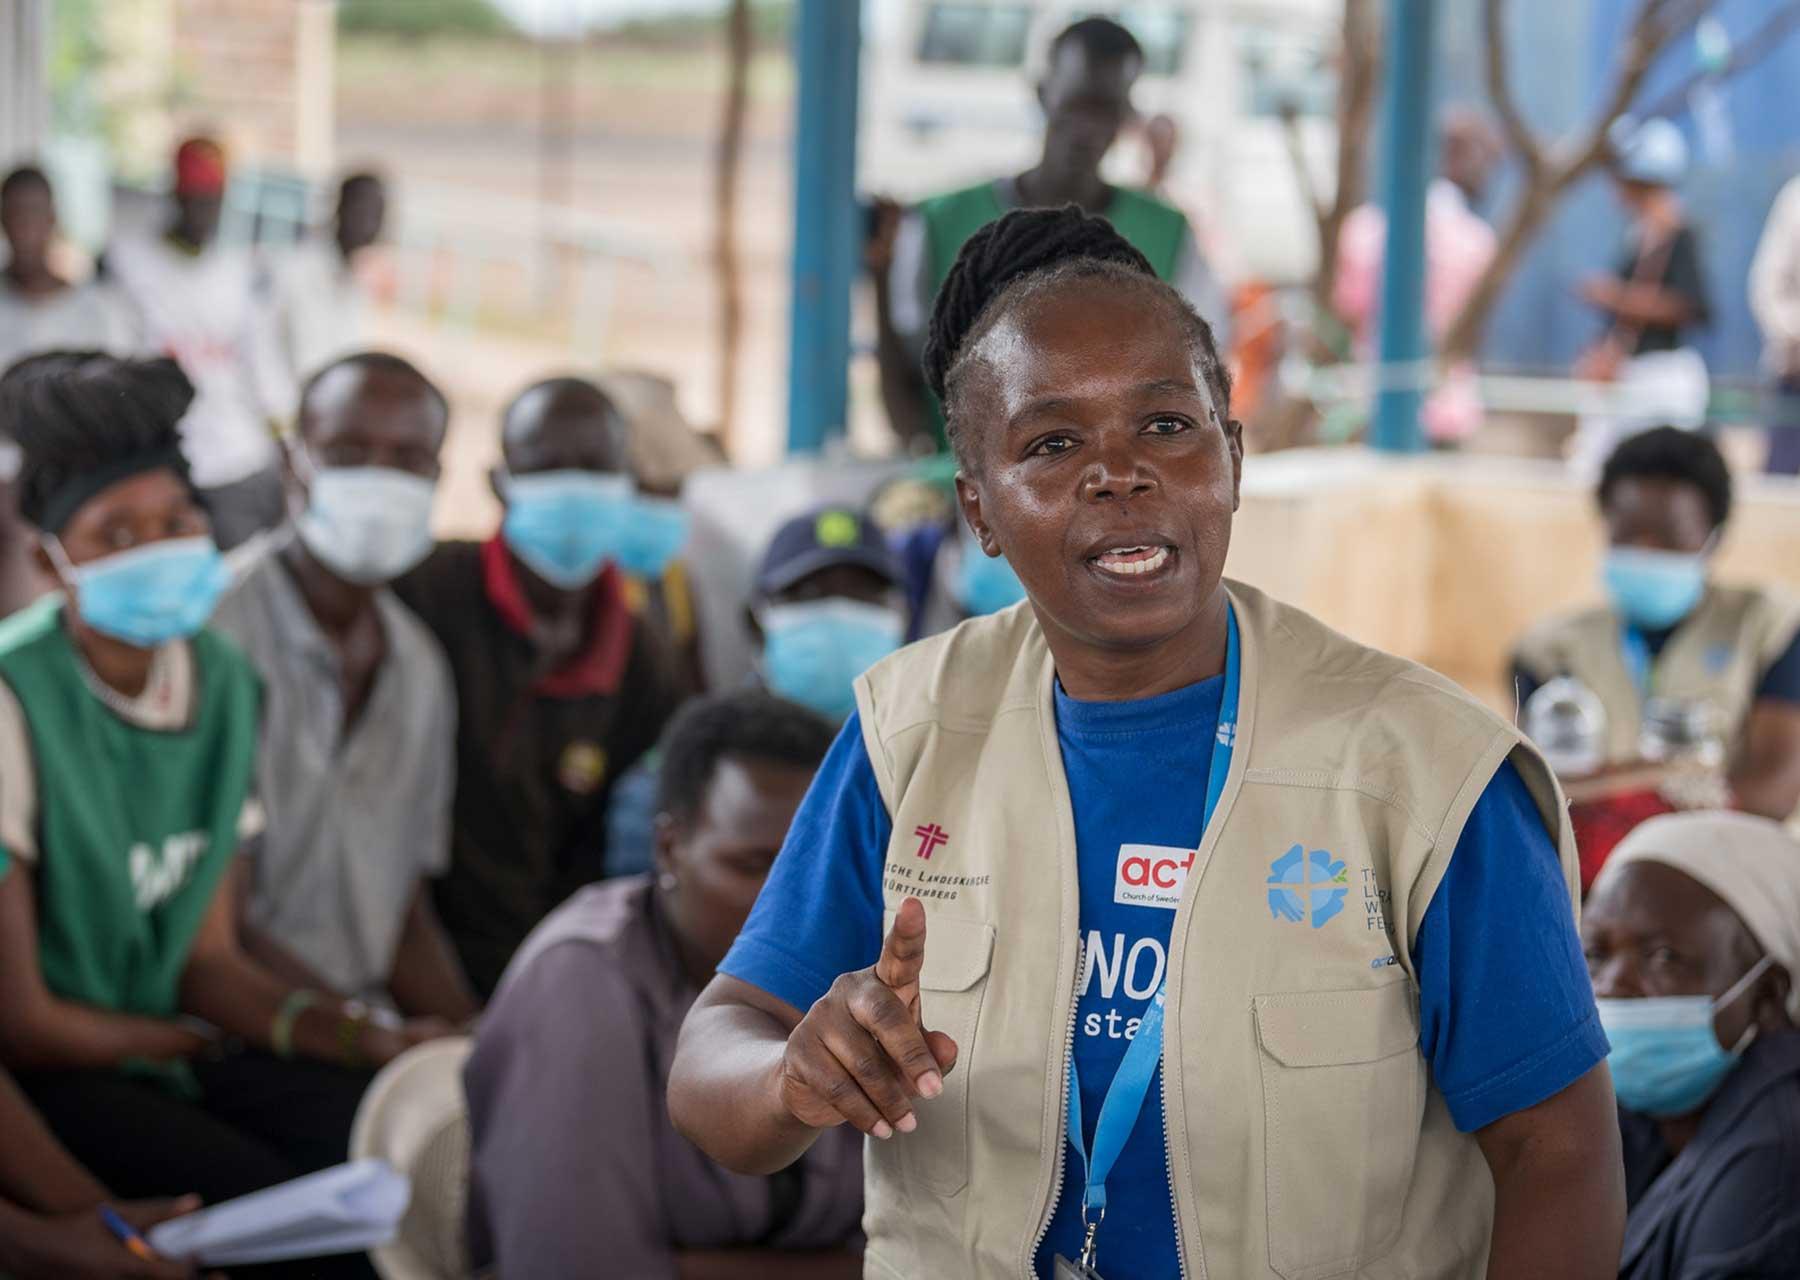 Livelihoods officer Hilda Thuo gives instructions for the distribution of core relief items to refugees at the reception centre of the Kalobeyei refugee settlement near Kakuma refugee camp, Kenya. Photo: LWF/ Albin Hillert